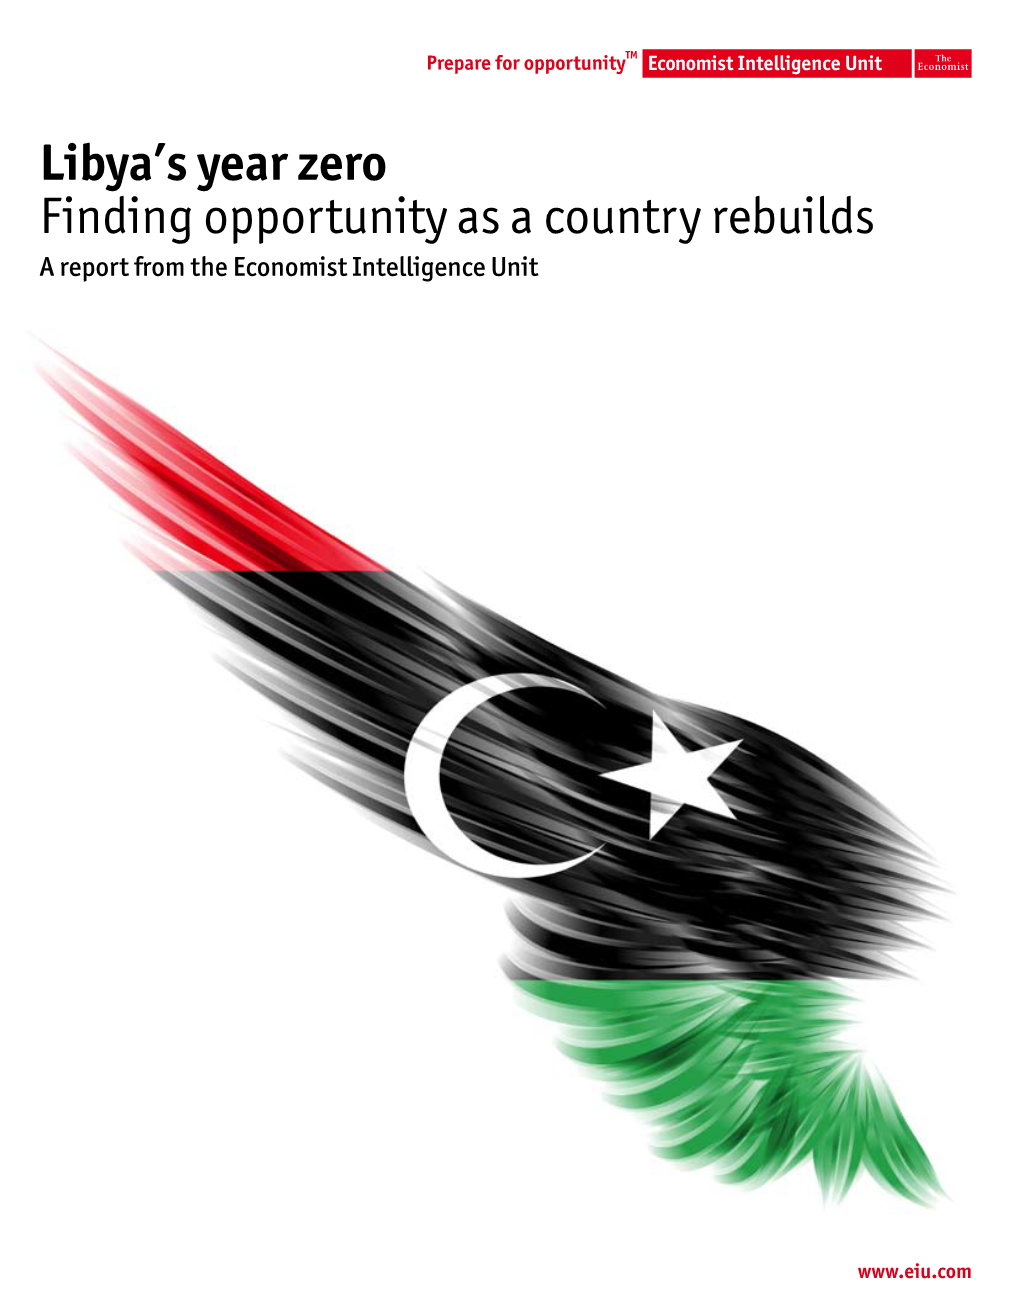 Libya's Year Zero Finding Opportunity As a Country Rebuilds